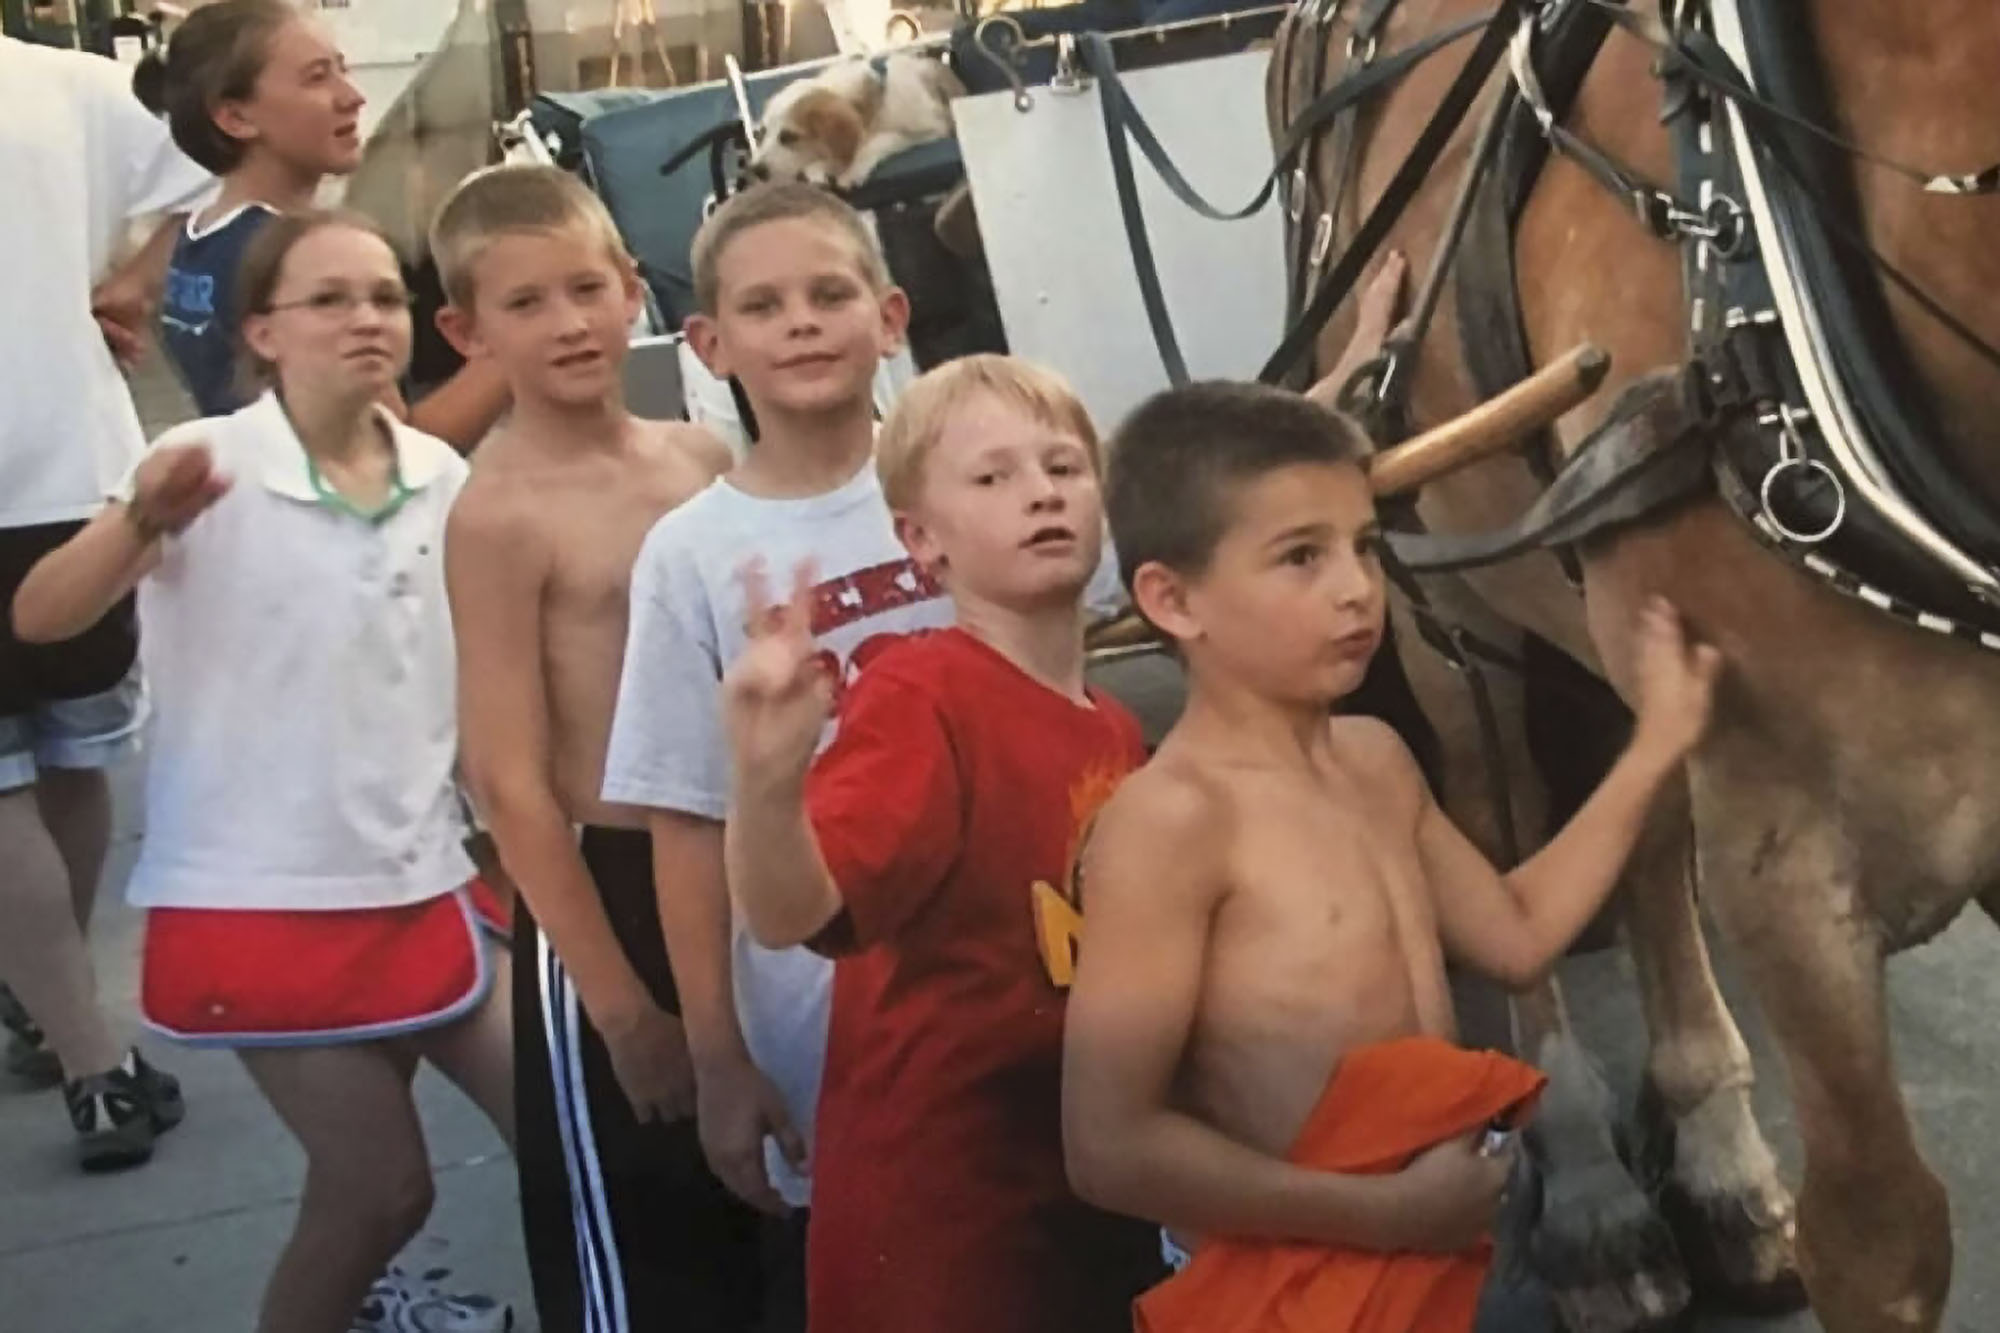 Sam Hauser and Ben Vander Plas (second and third from left) in line when they were children touching a horse